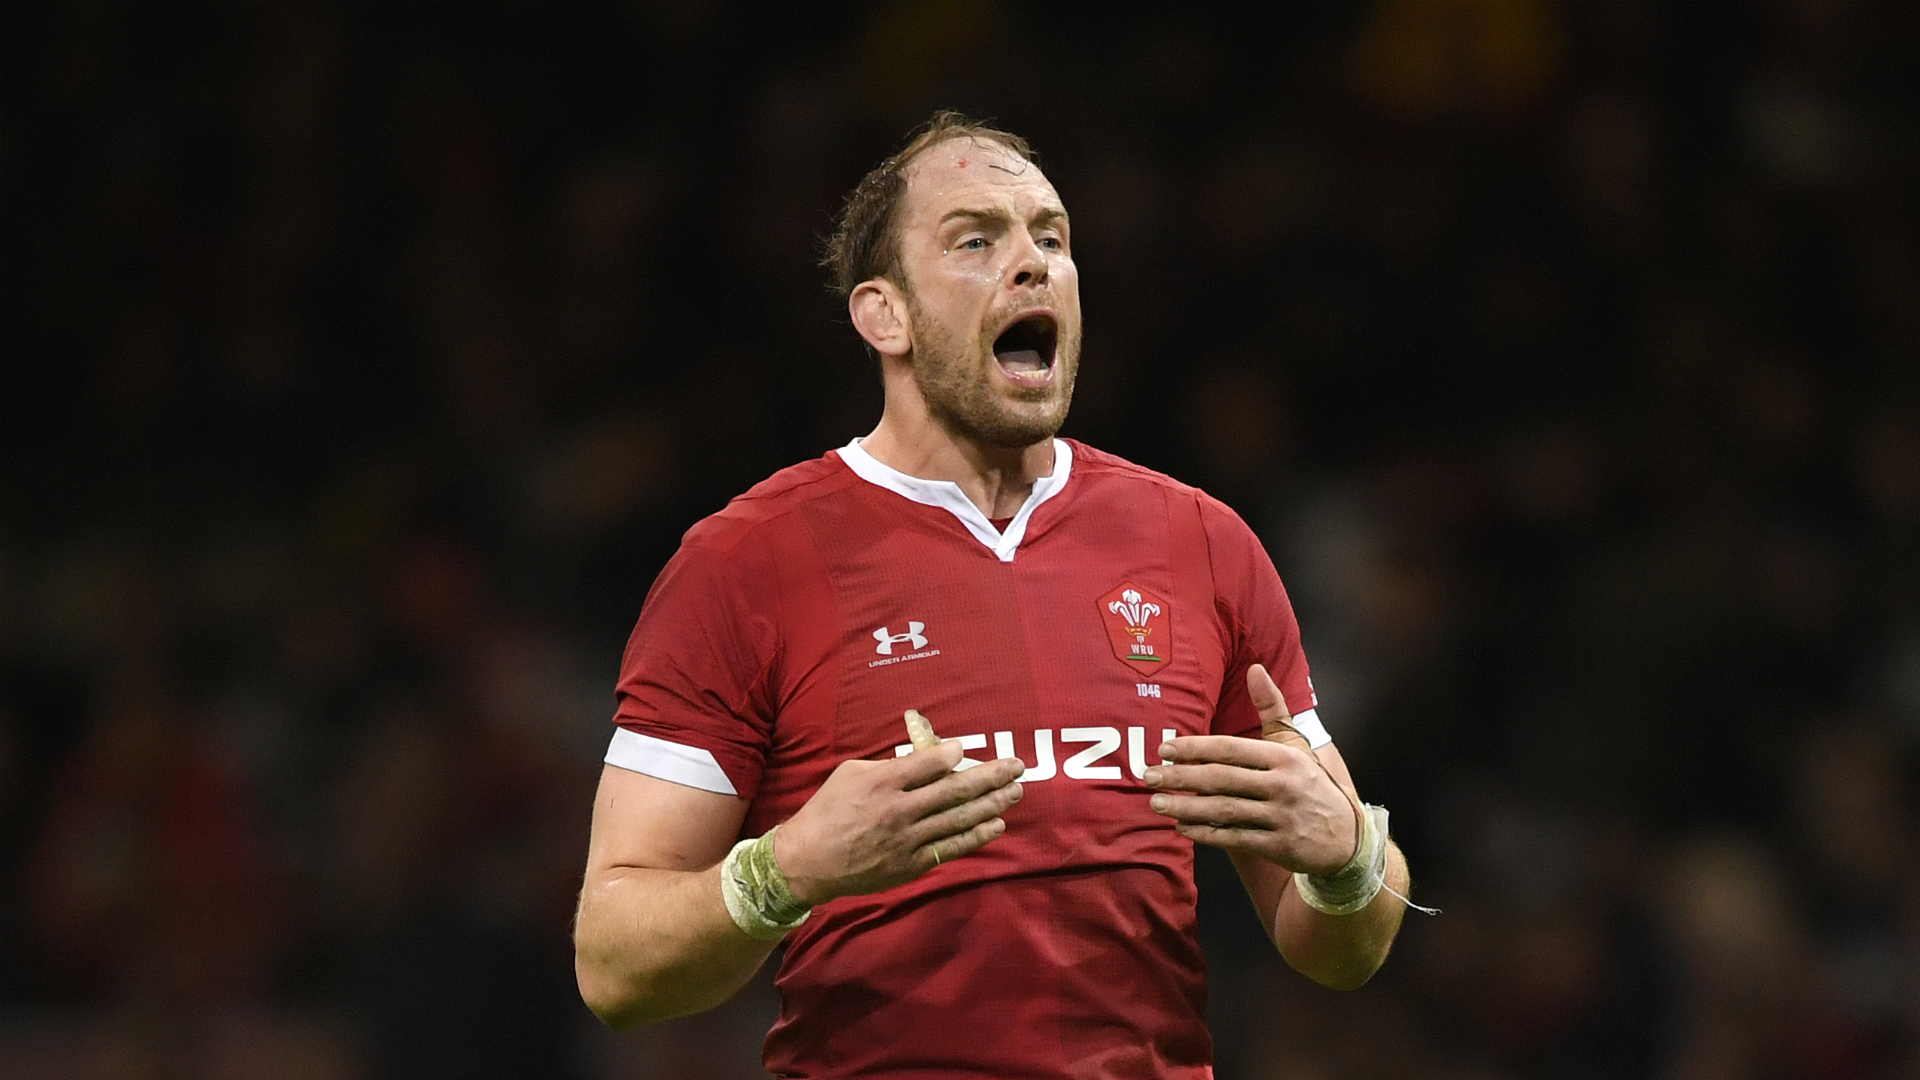 Wales captain Alun Wyn Jones will make a world record 149th international appearance when he leads his country against Scotland.